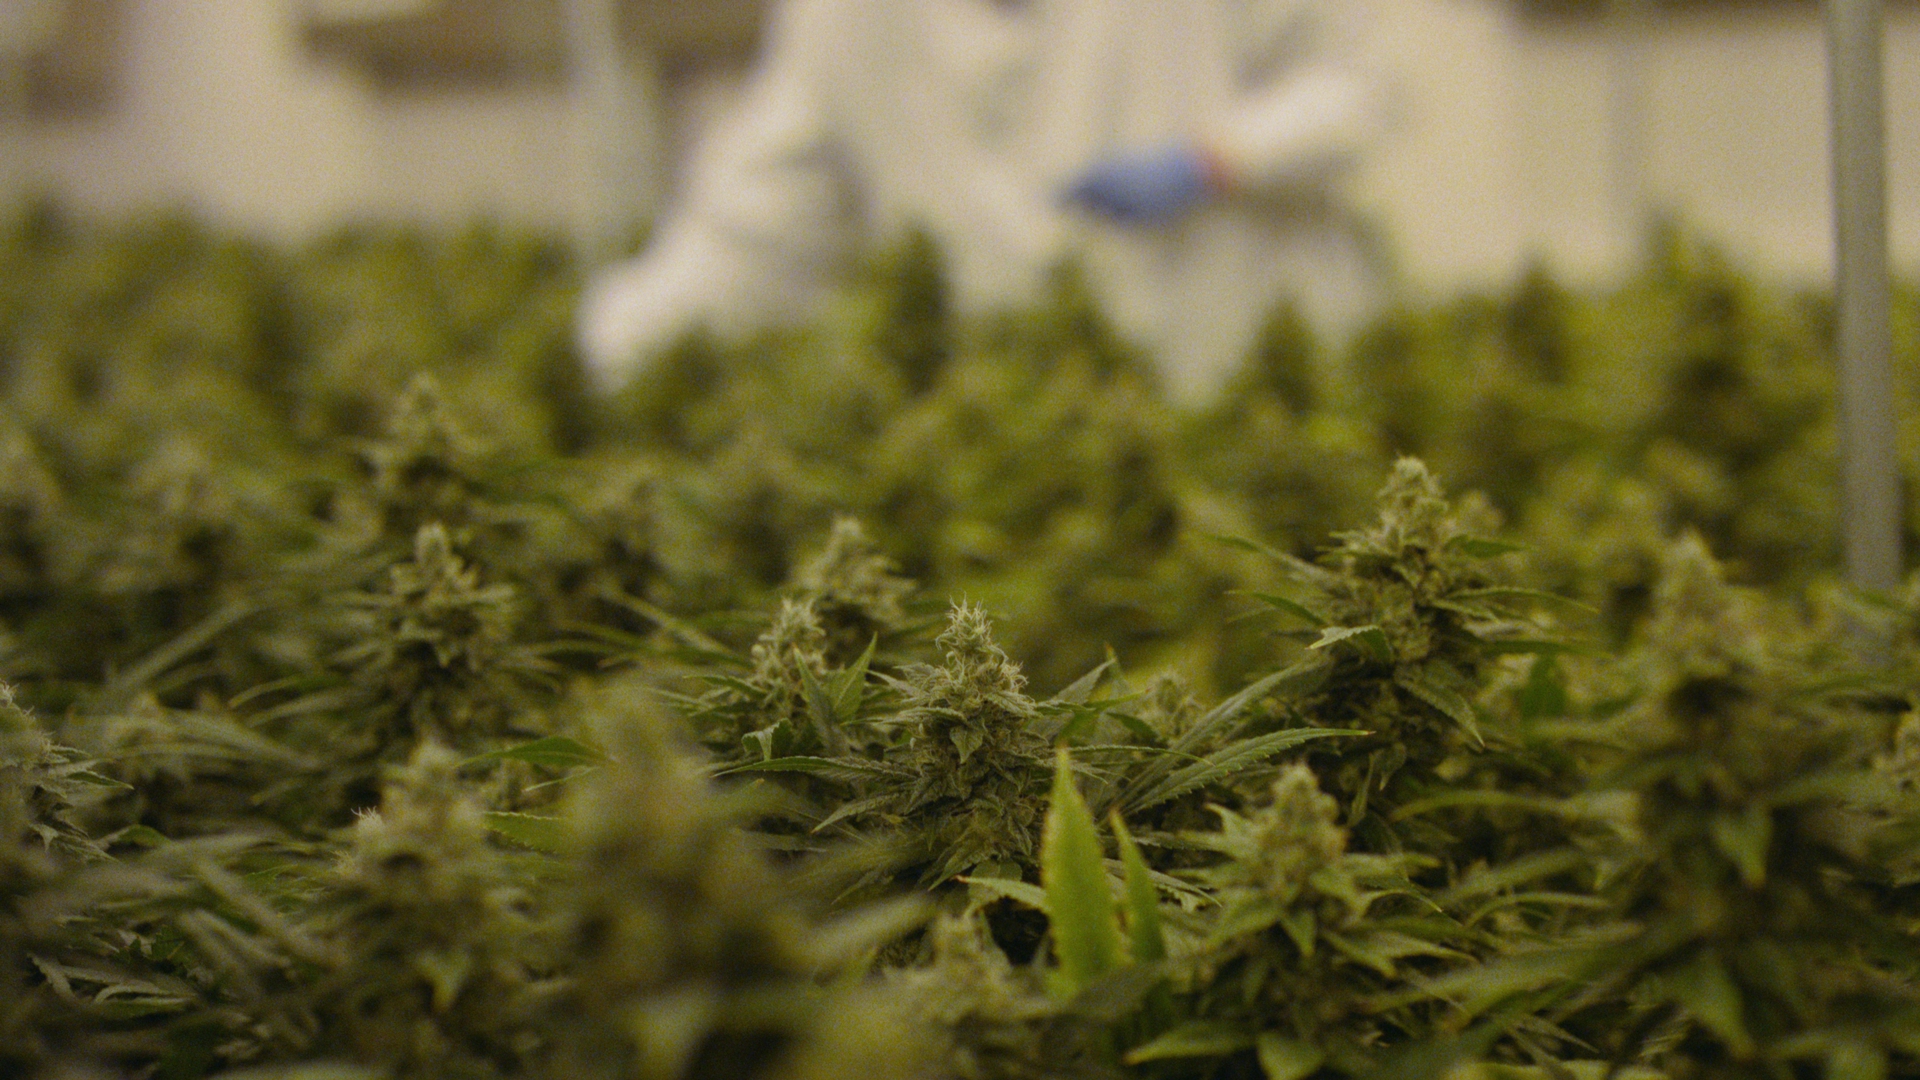 Close up photo of cannabis flowers growing in a factory, with a worker in the background